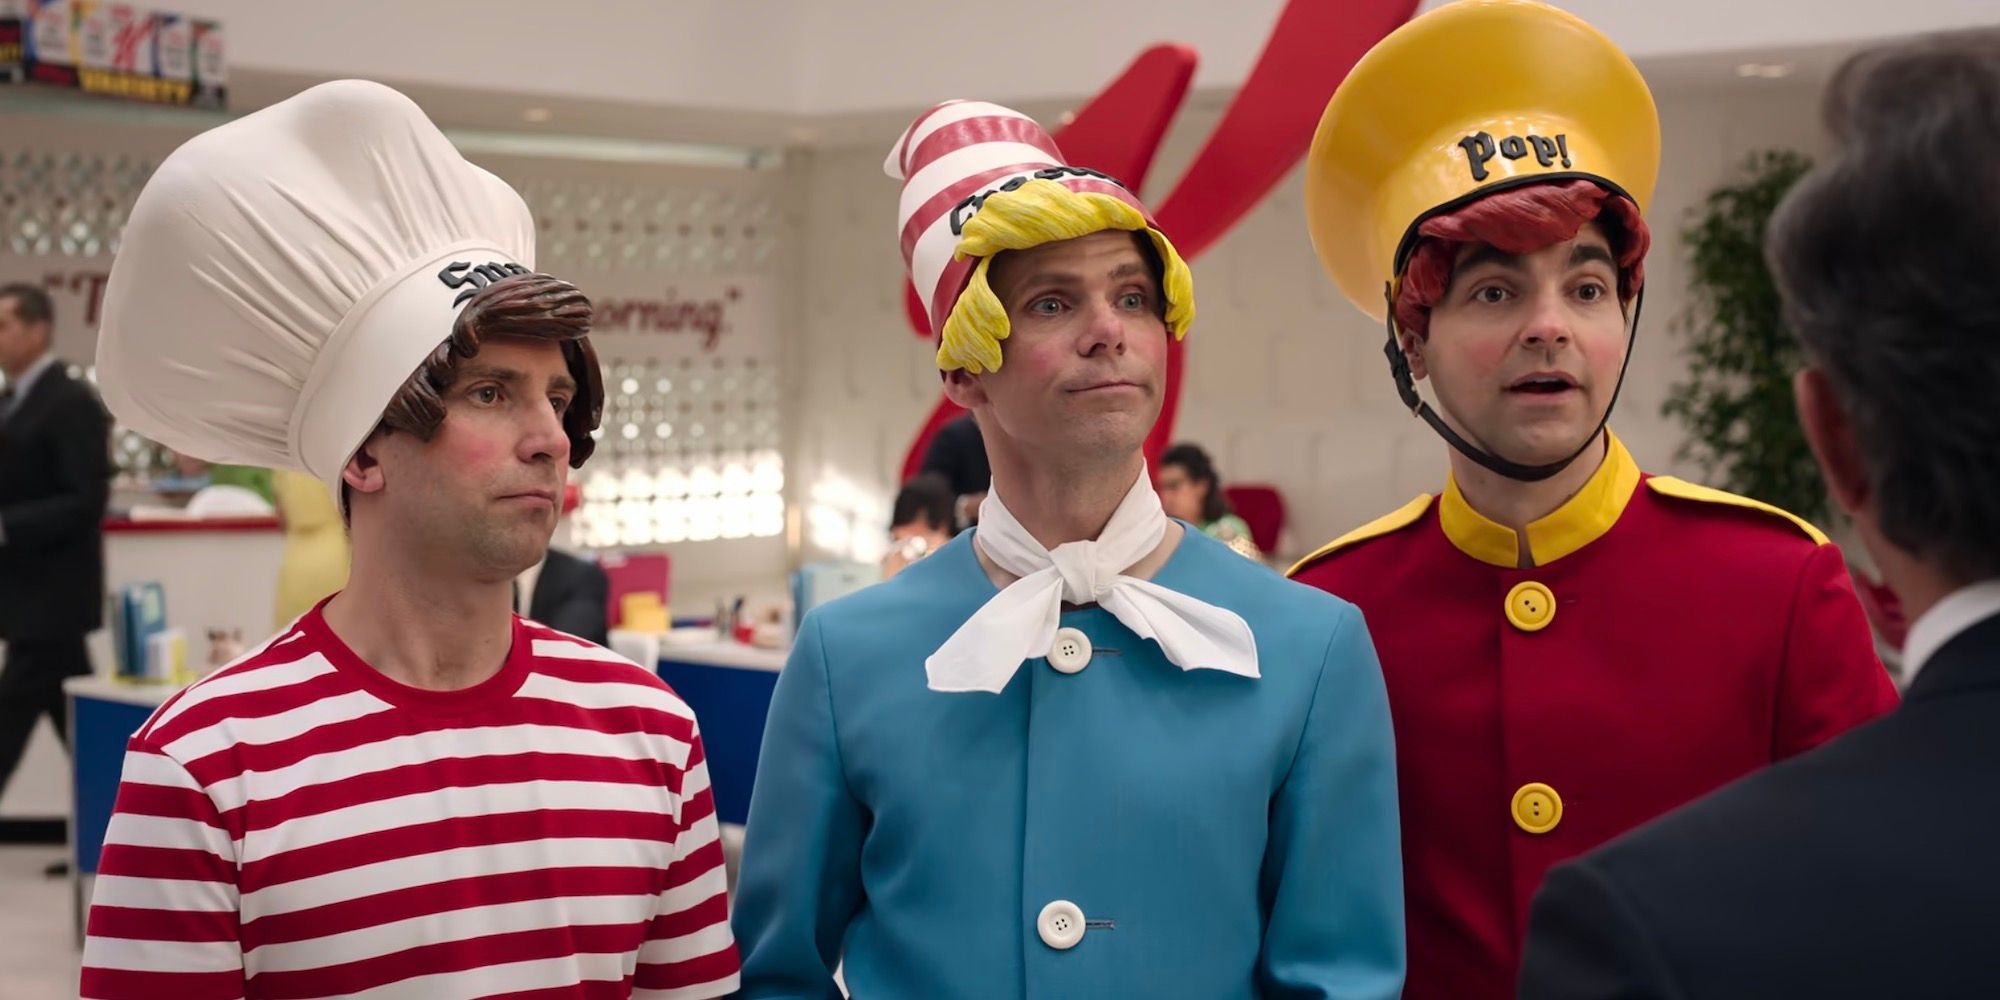 Kyle Mooney, Mikey Day, and Drew Tarver are dressed as Snap, Crackle, and Pop. 